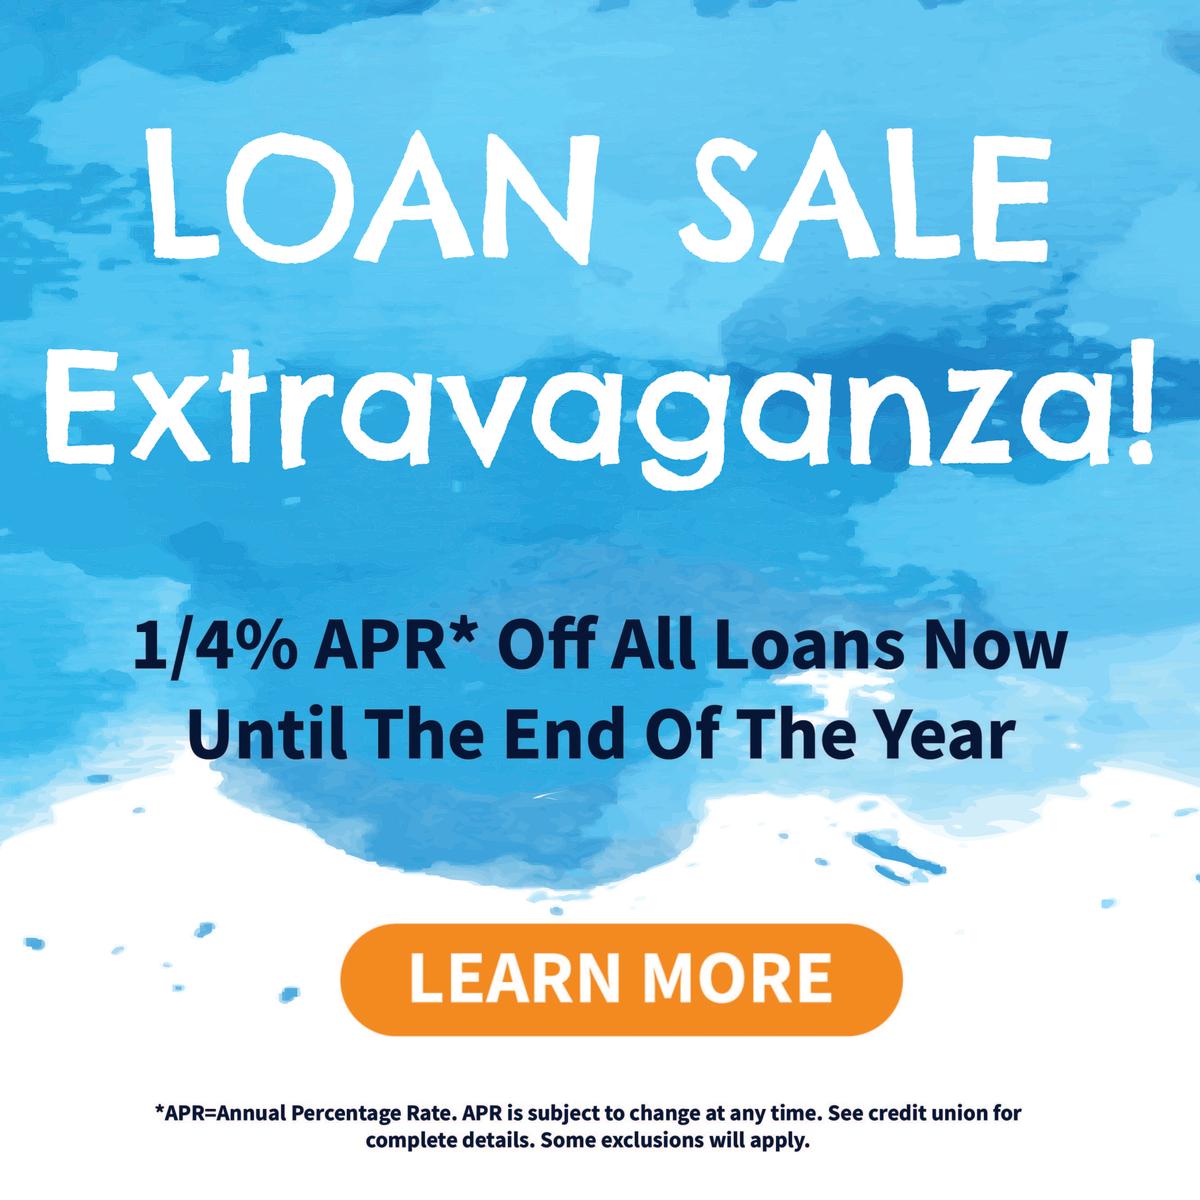 1/4% off all Loan APR* for the rest of the year.